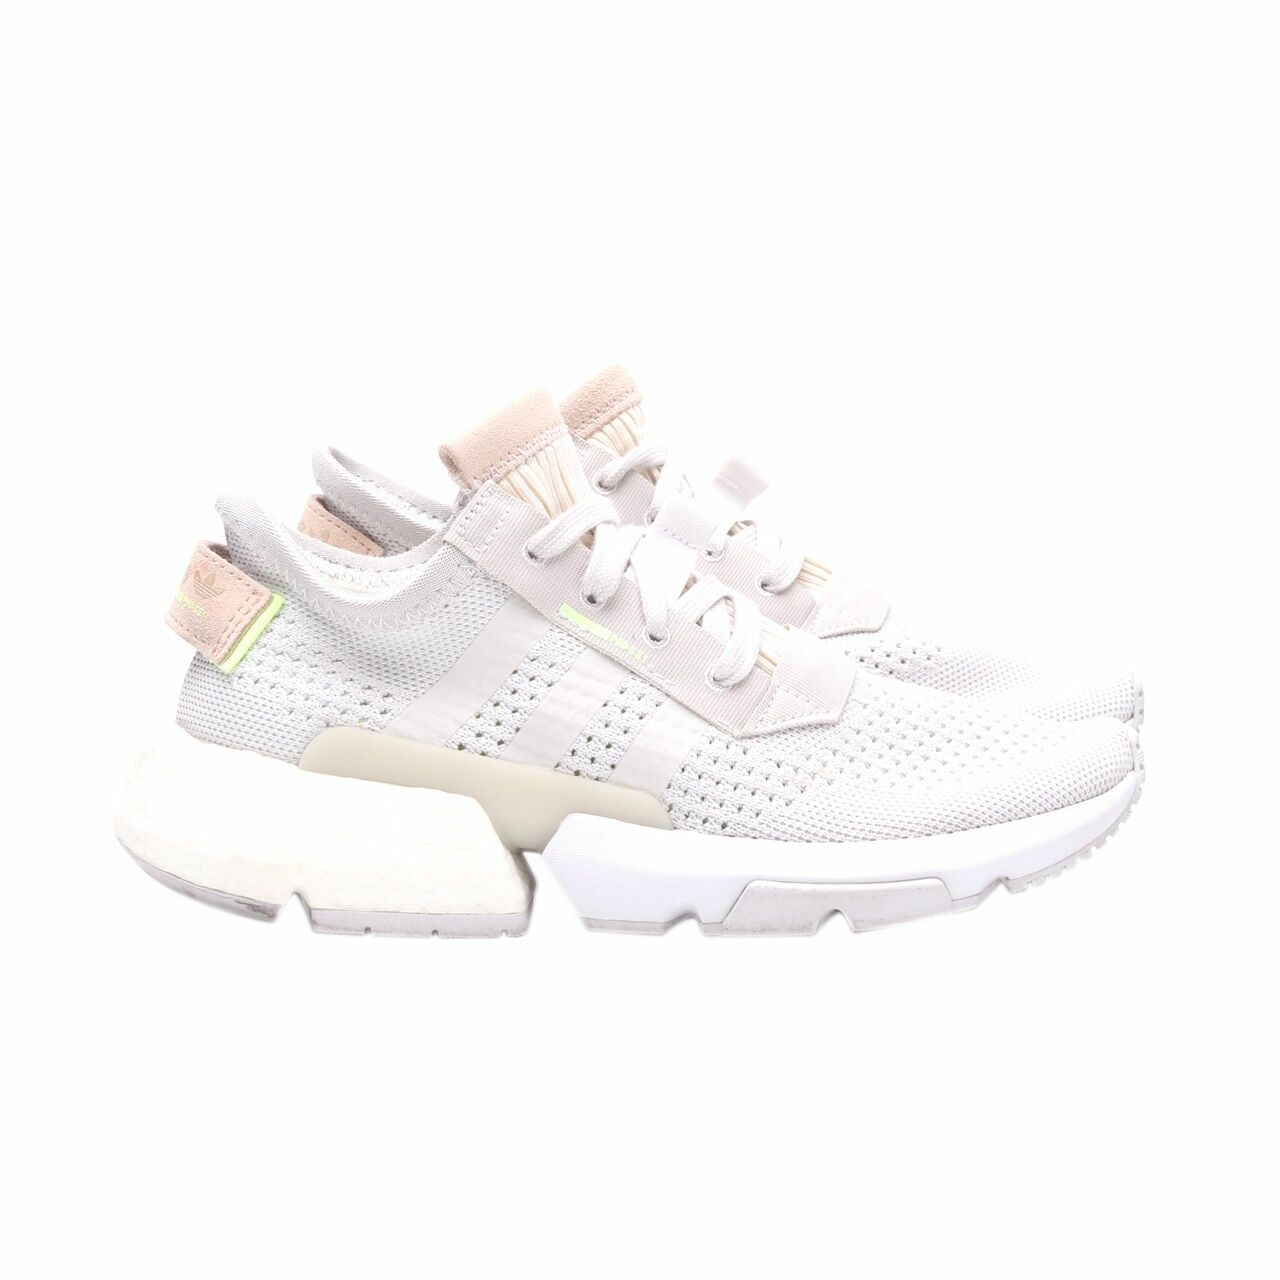 Adidas POD-S3.1 Sneakers